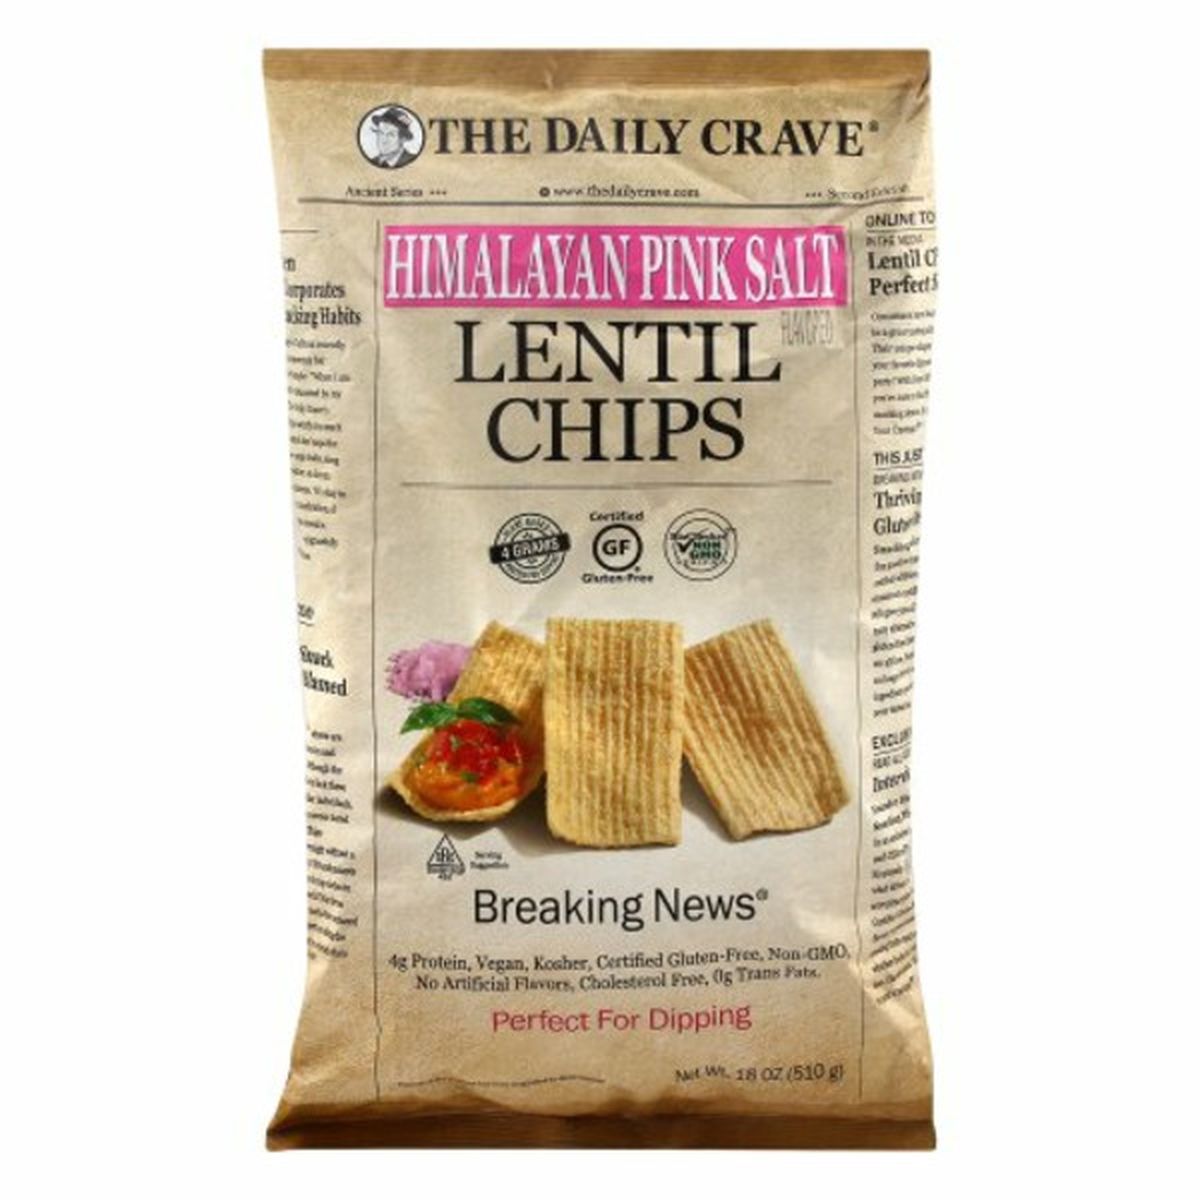 Calories in The Daily Crave Lentil Chips, Himalayan Pink Salt Flavored